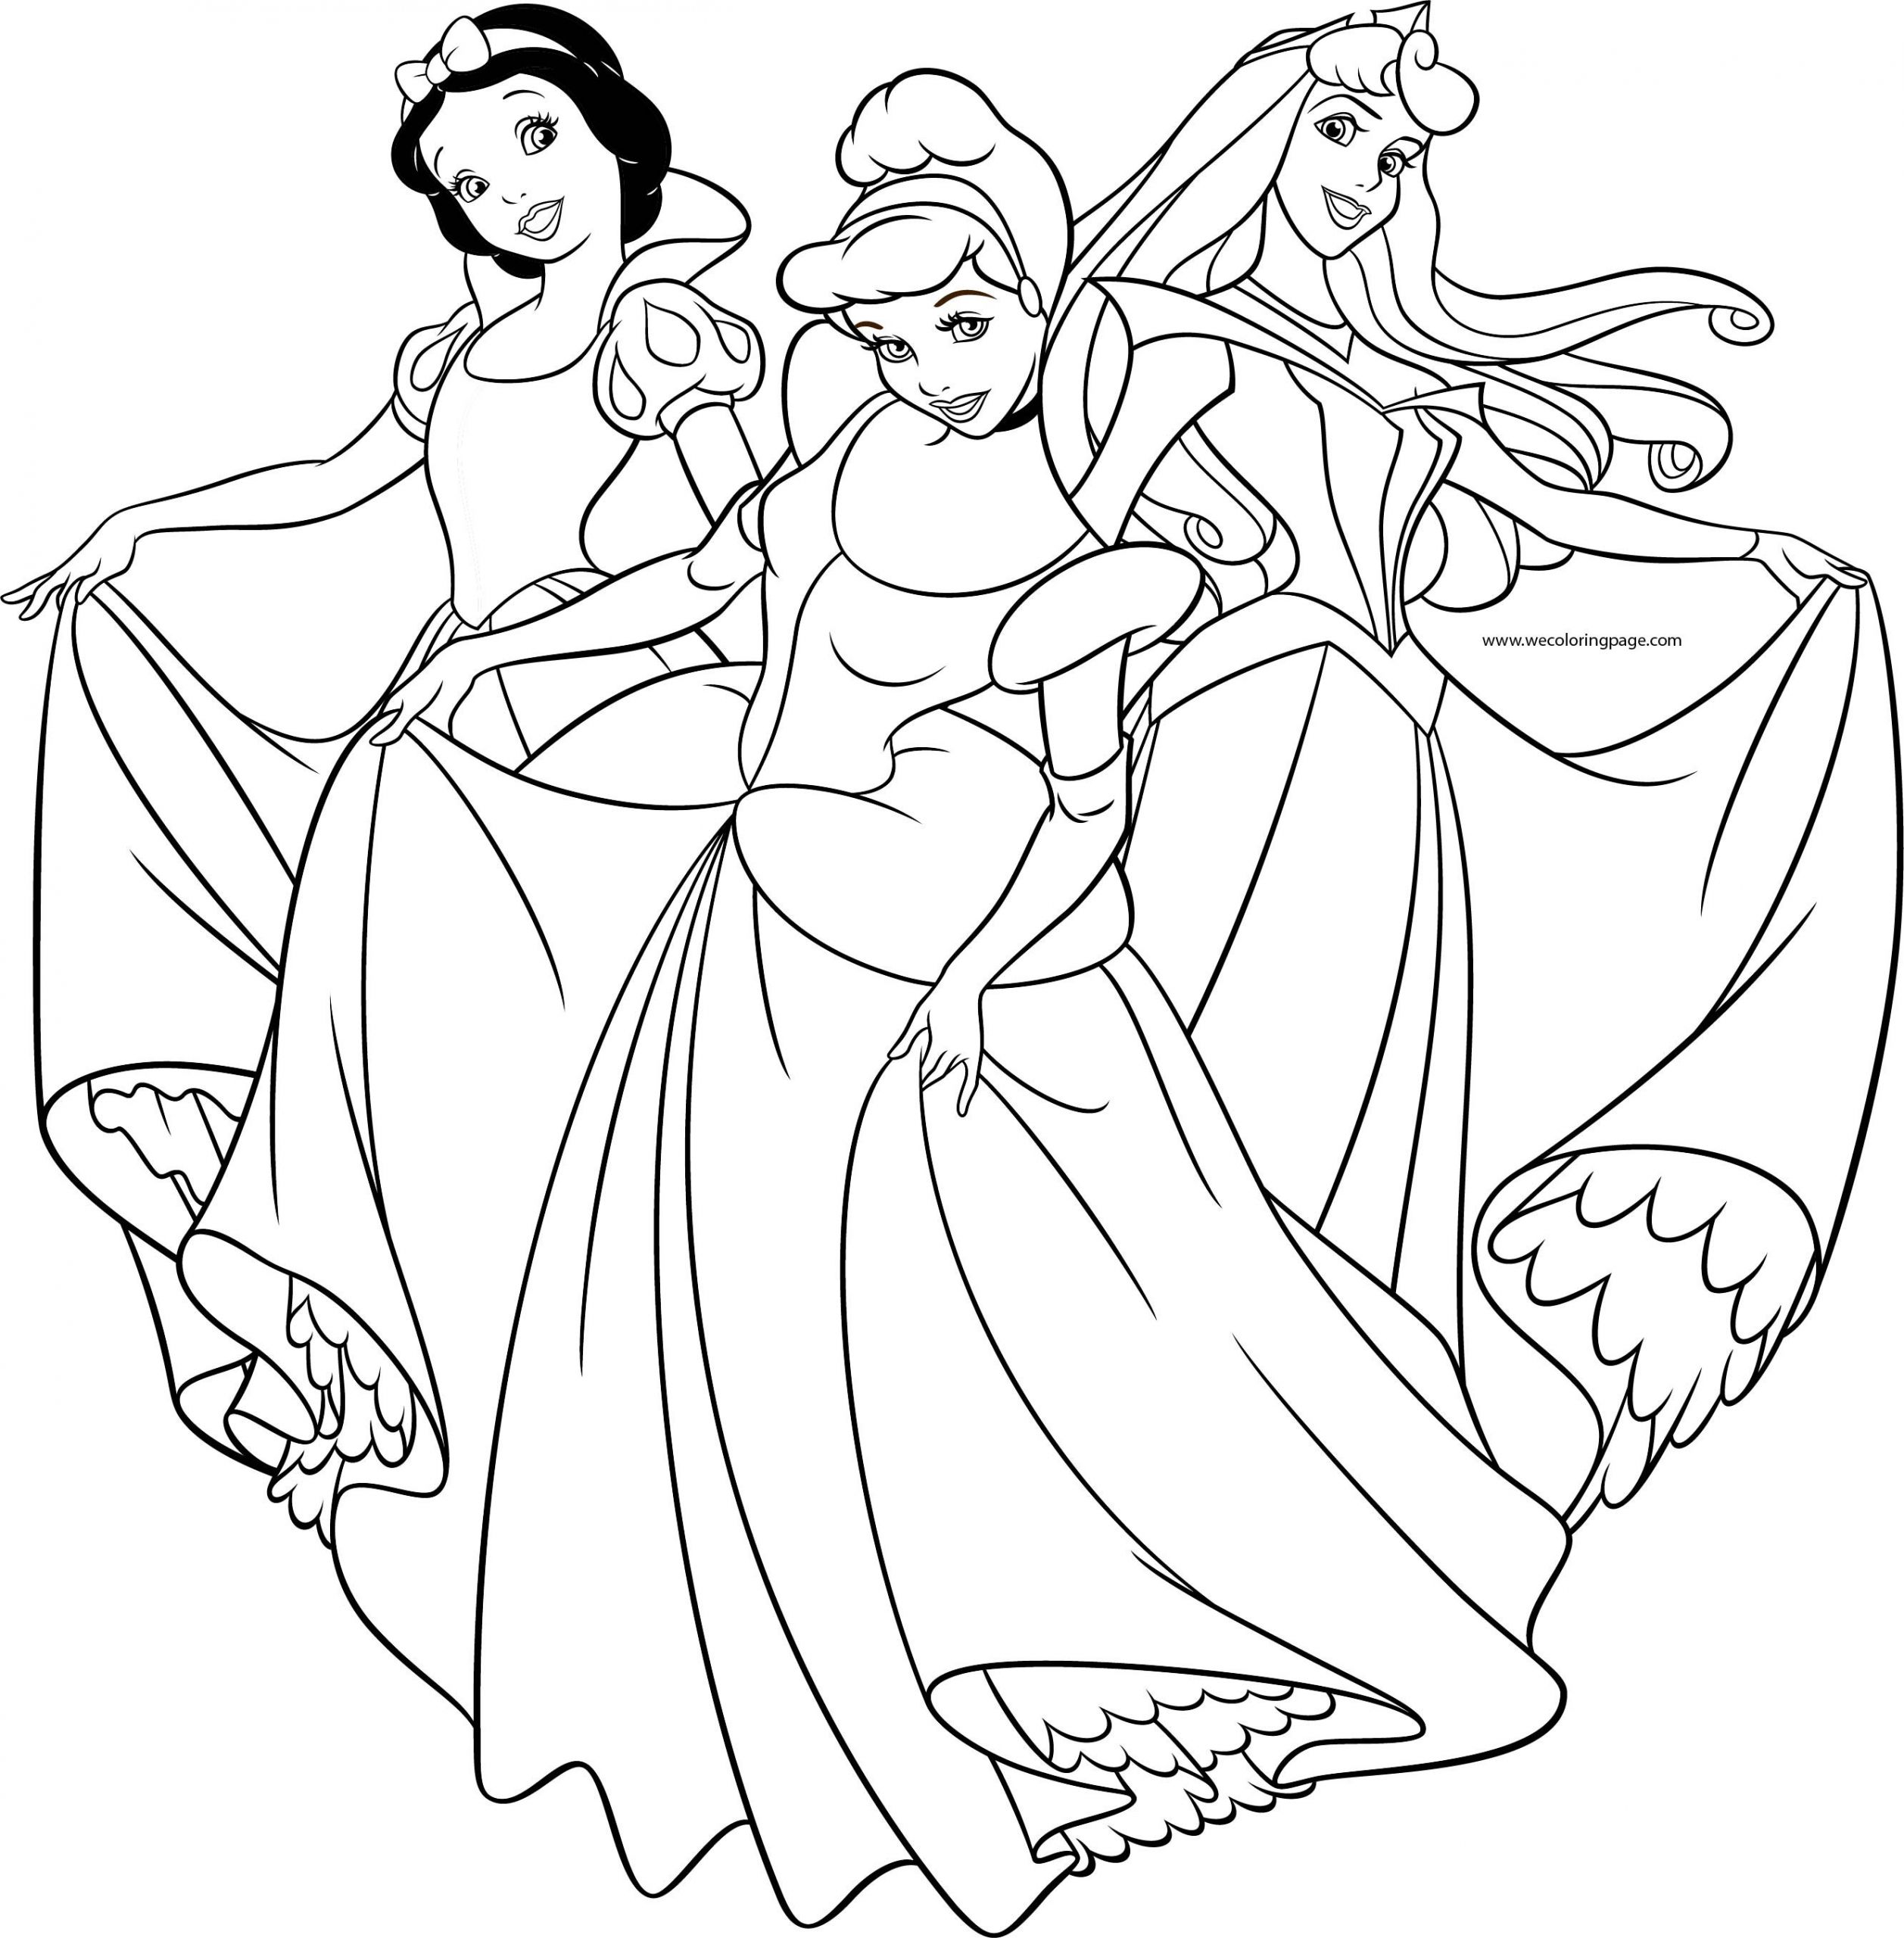 Coloring Pages Disney For Girls
 Disney Princess Girls Pose Coloring Page